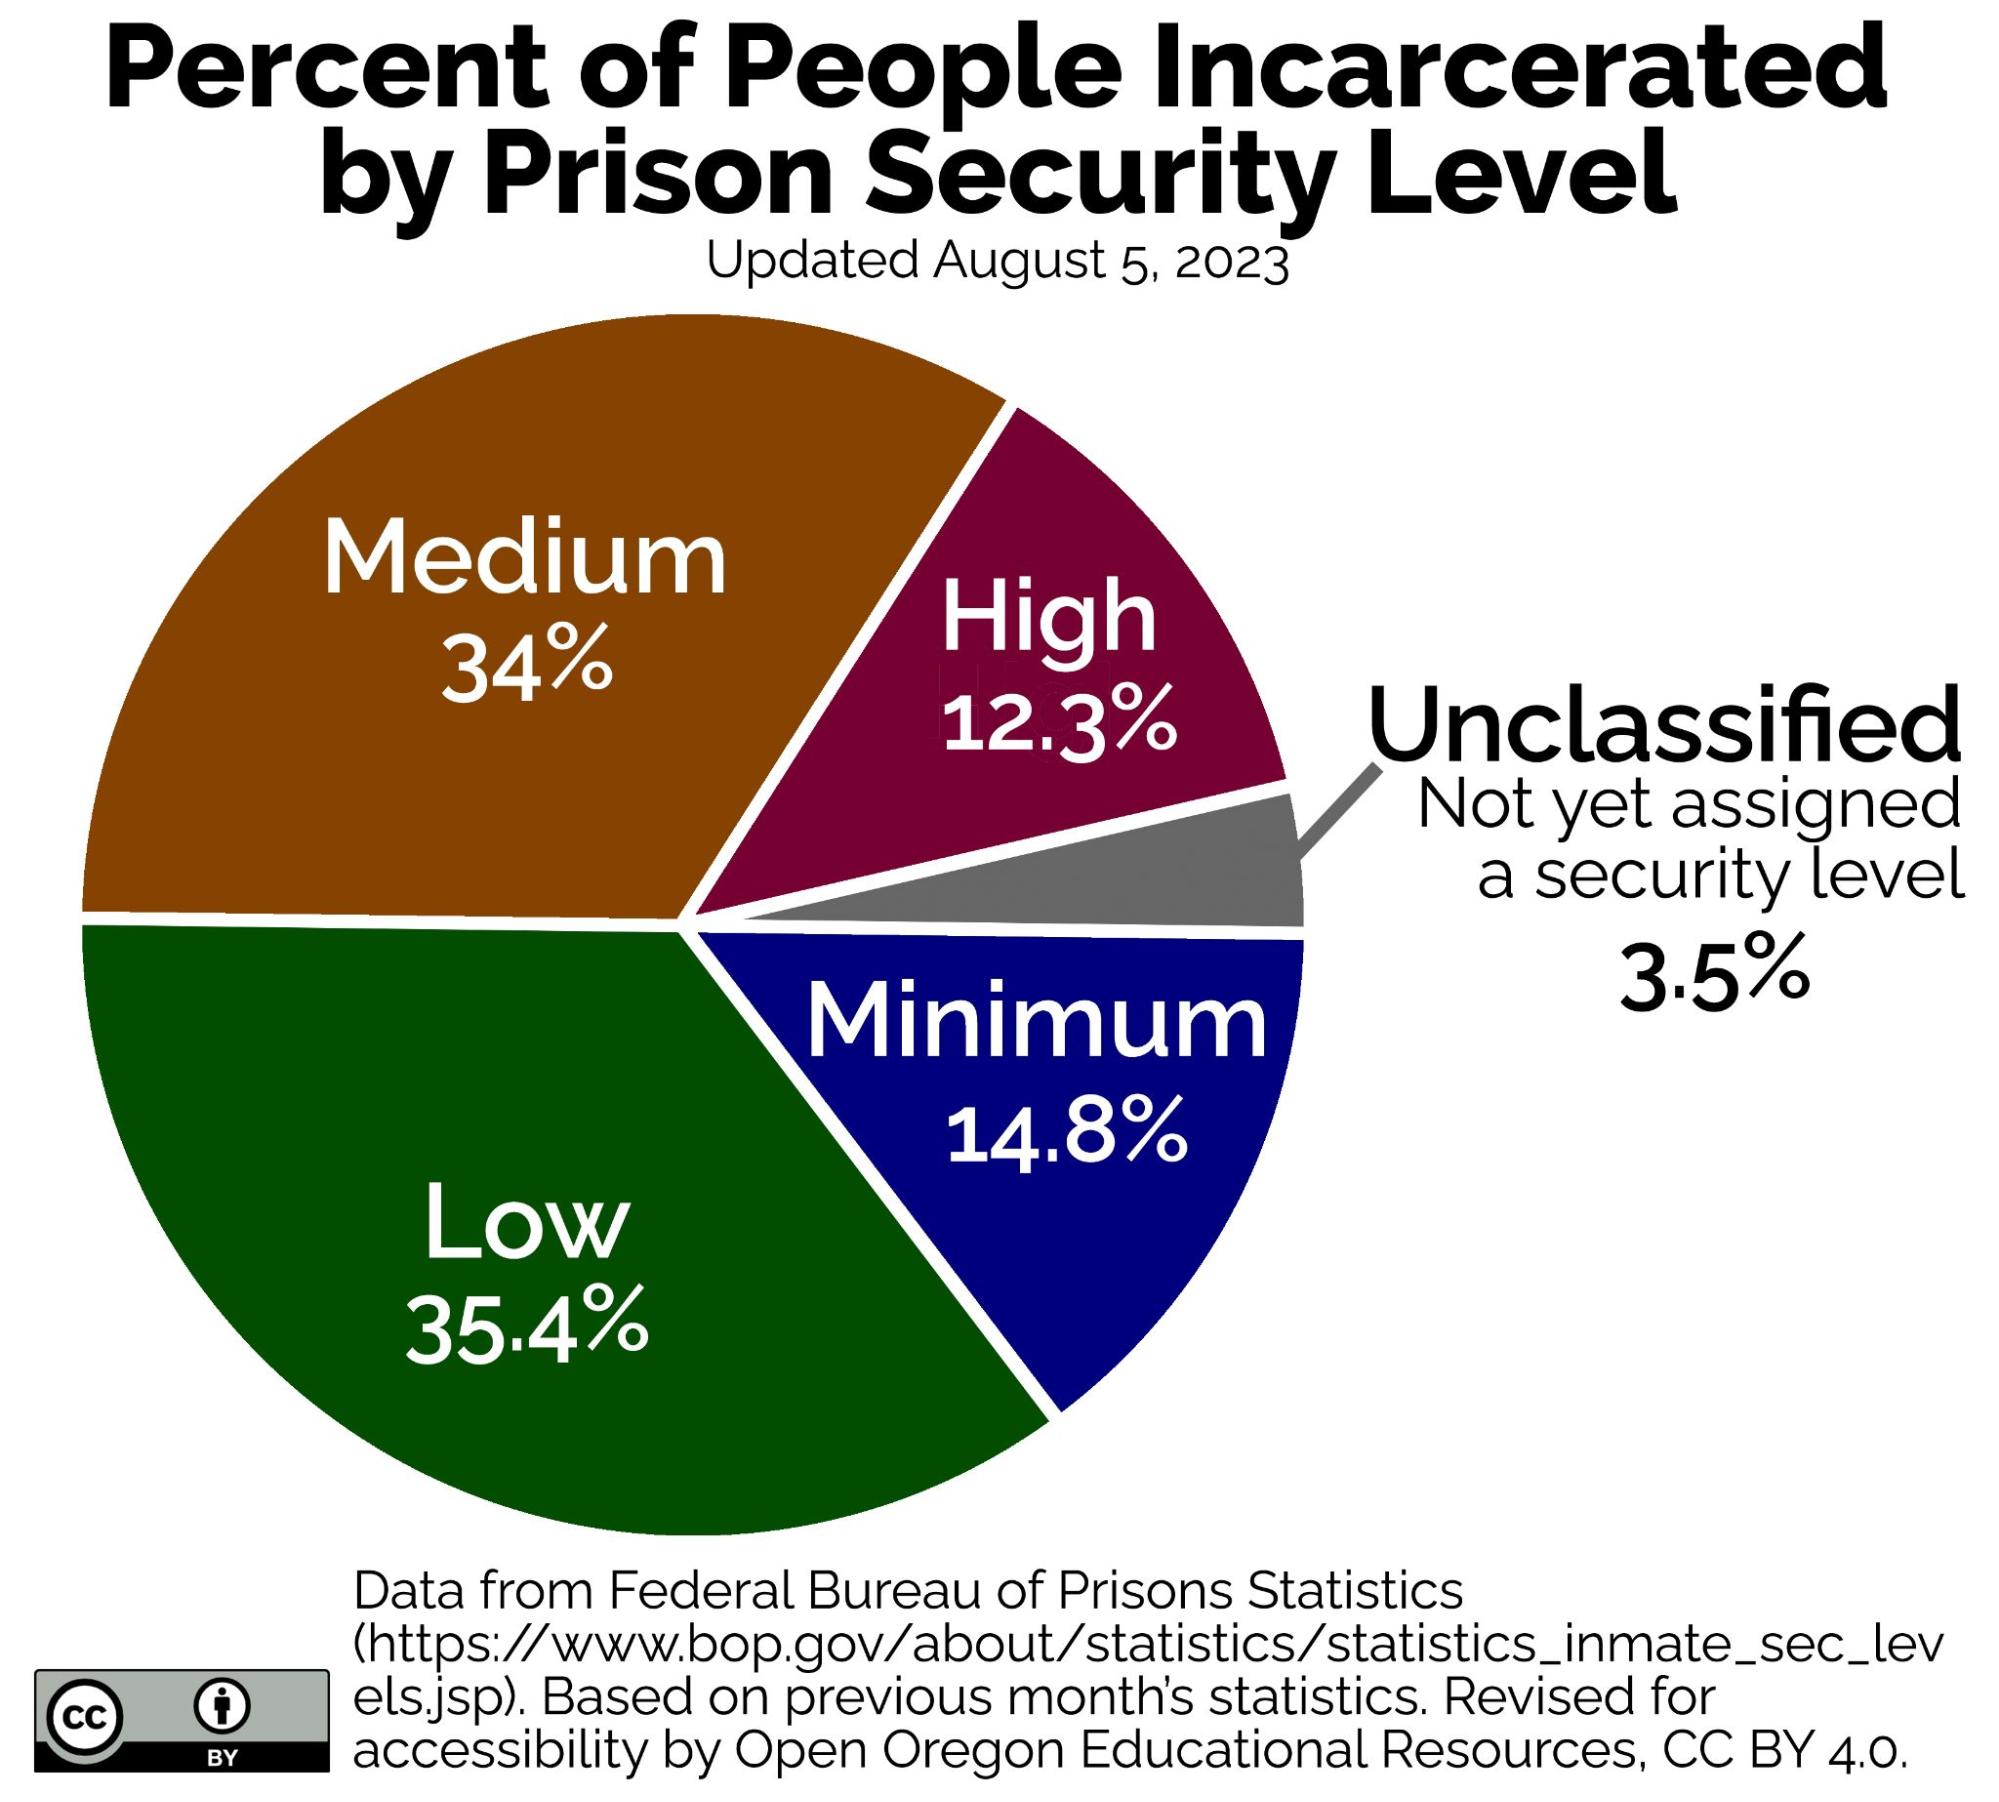 A pie chart showing the percent of people incarcerated by prison security level. The same data are also represented in a text table.